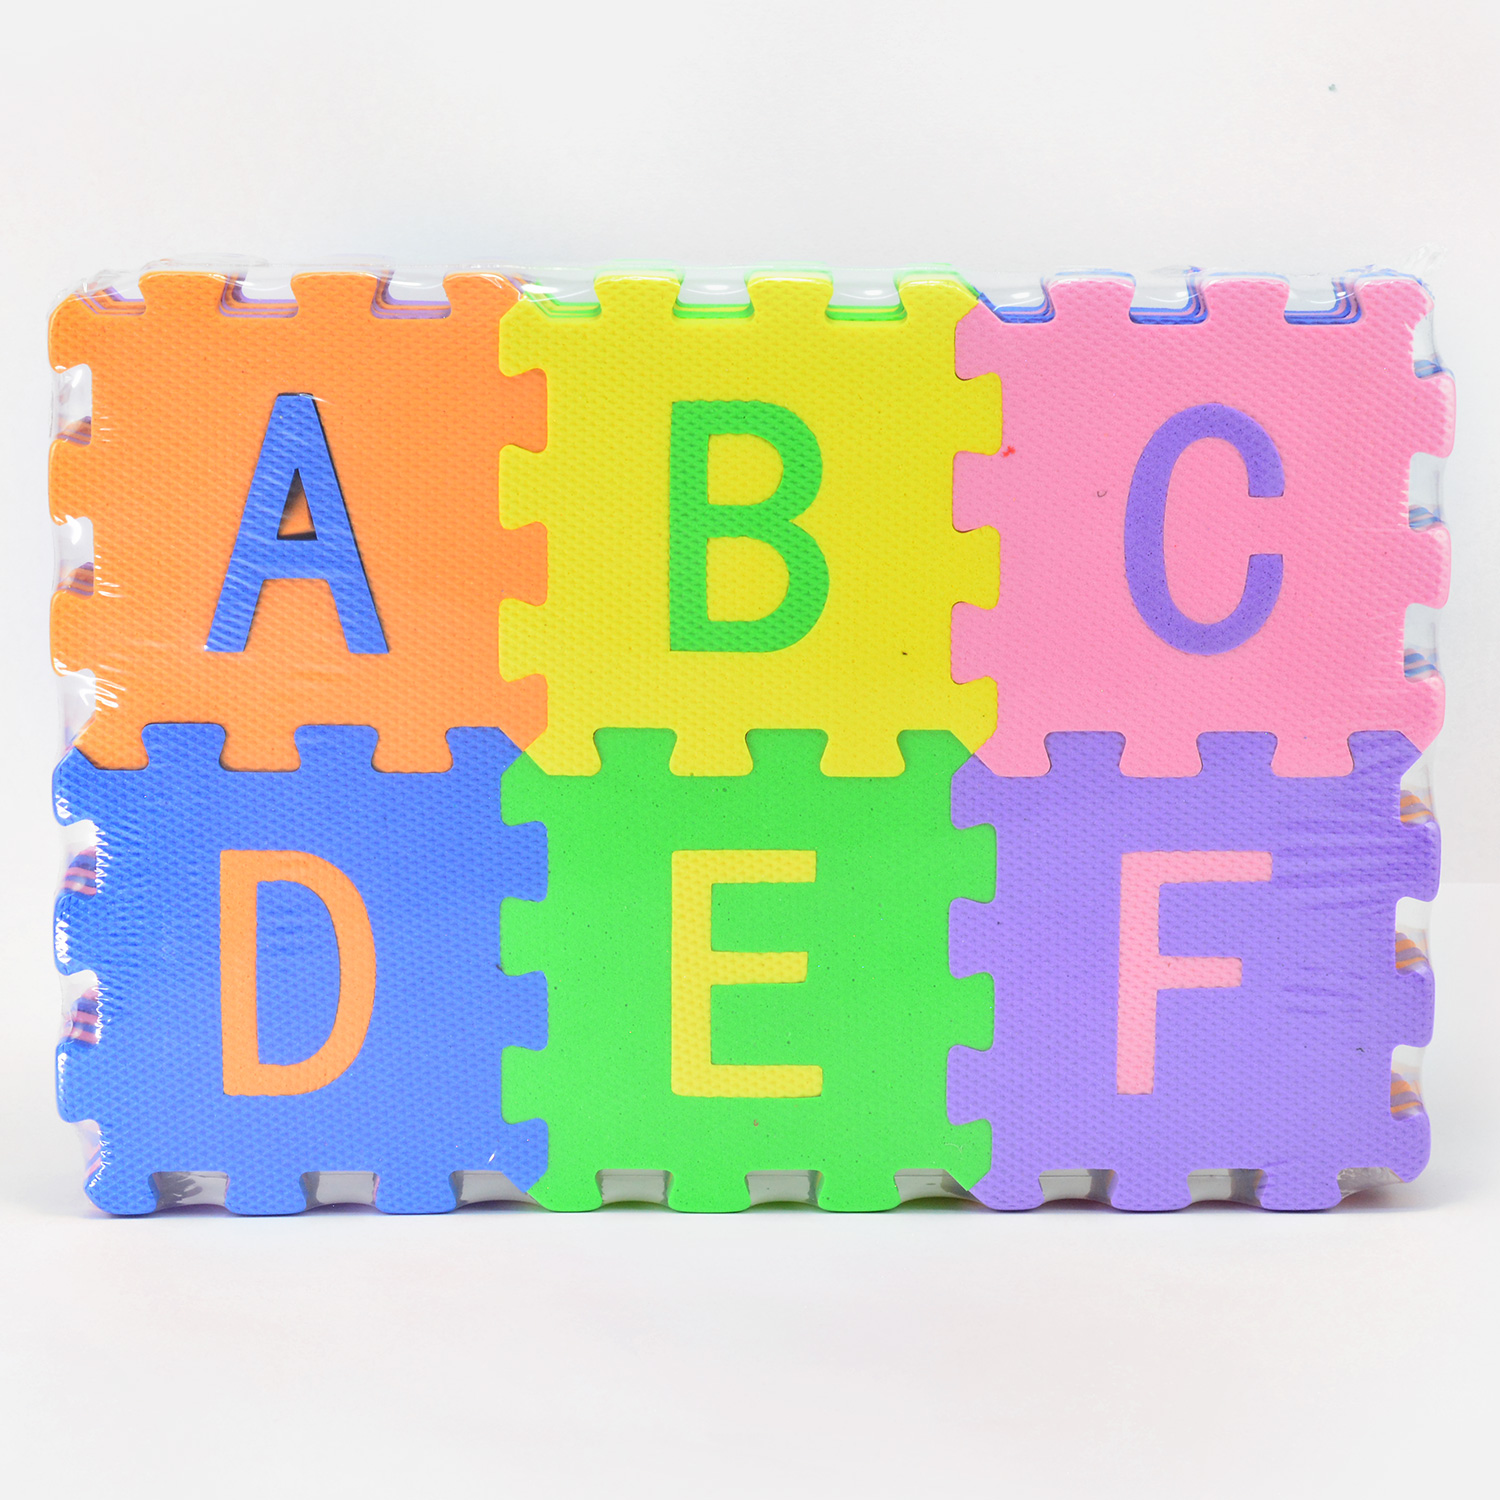 Special Alphabet Learning Game for Kids